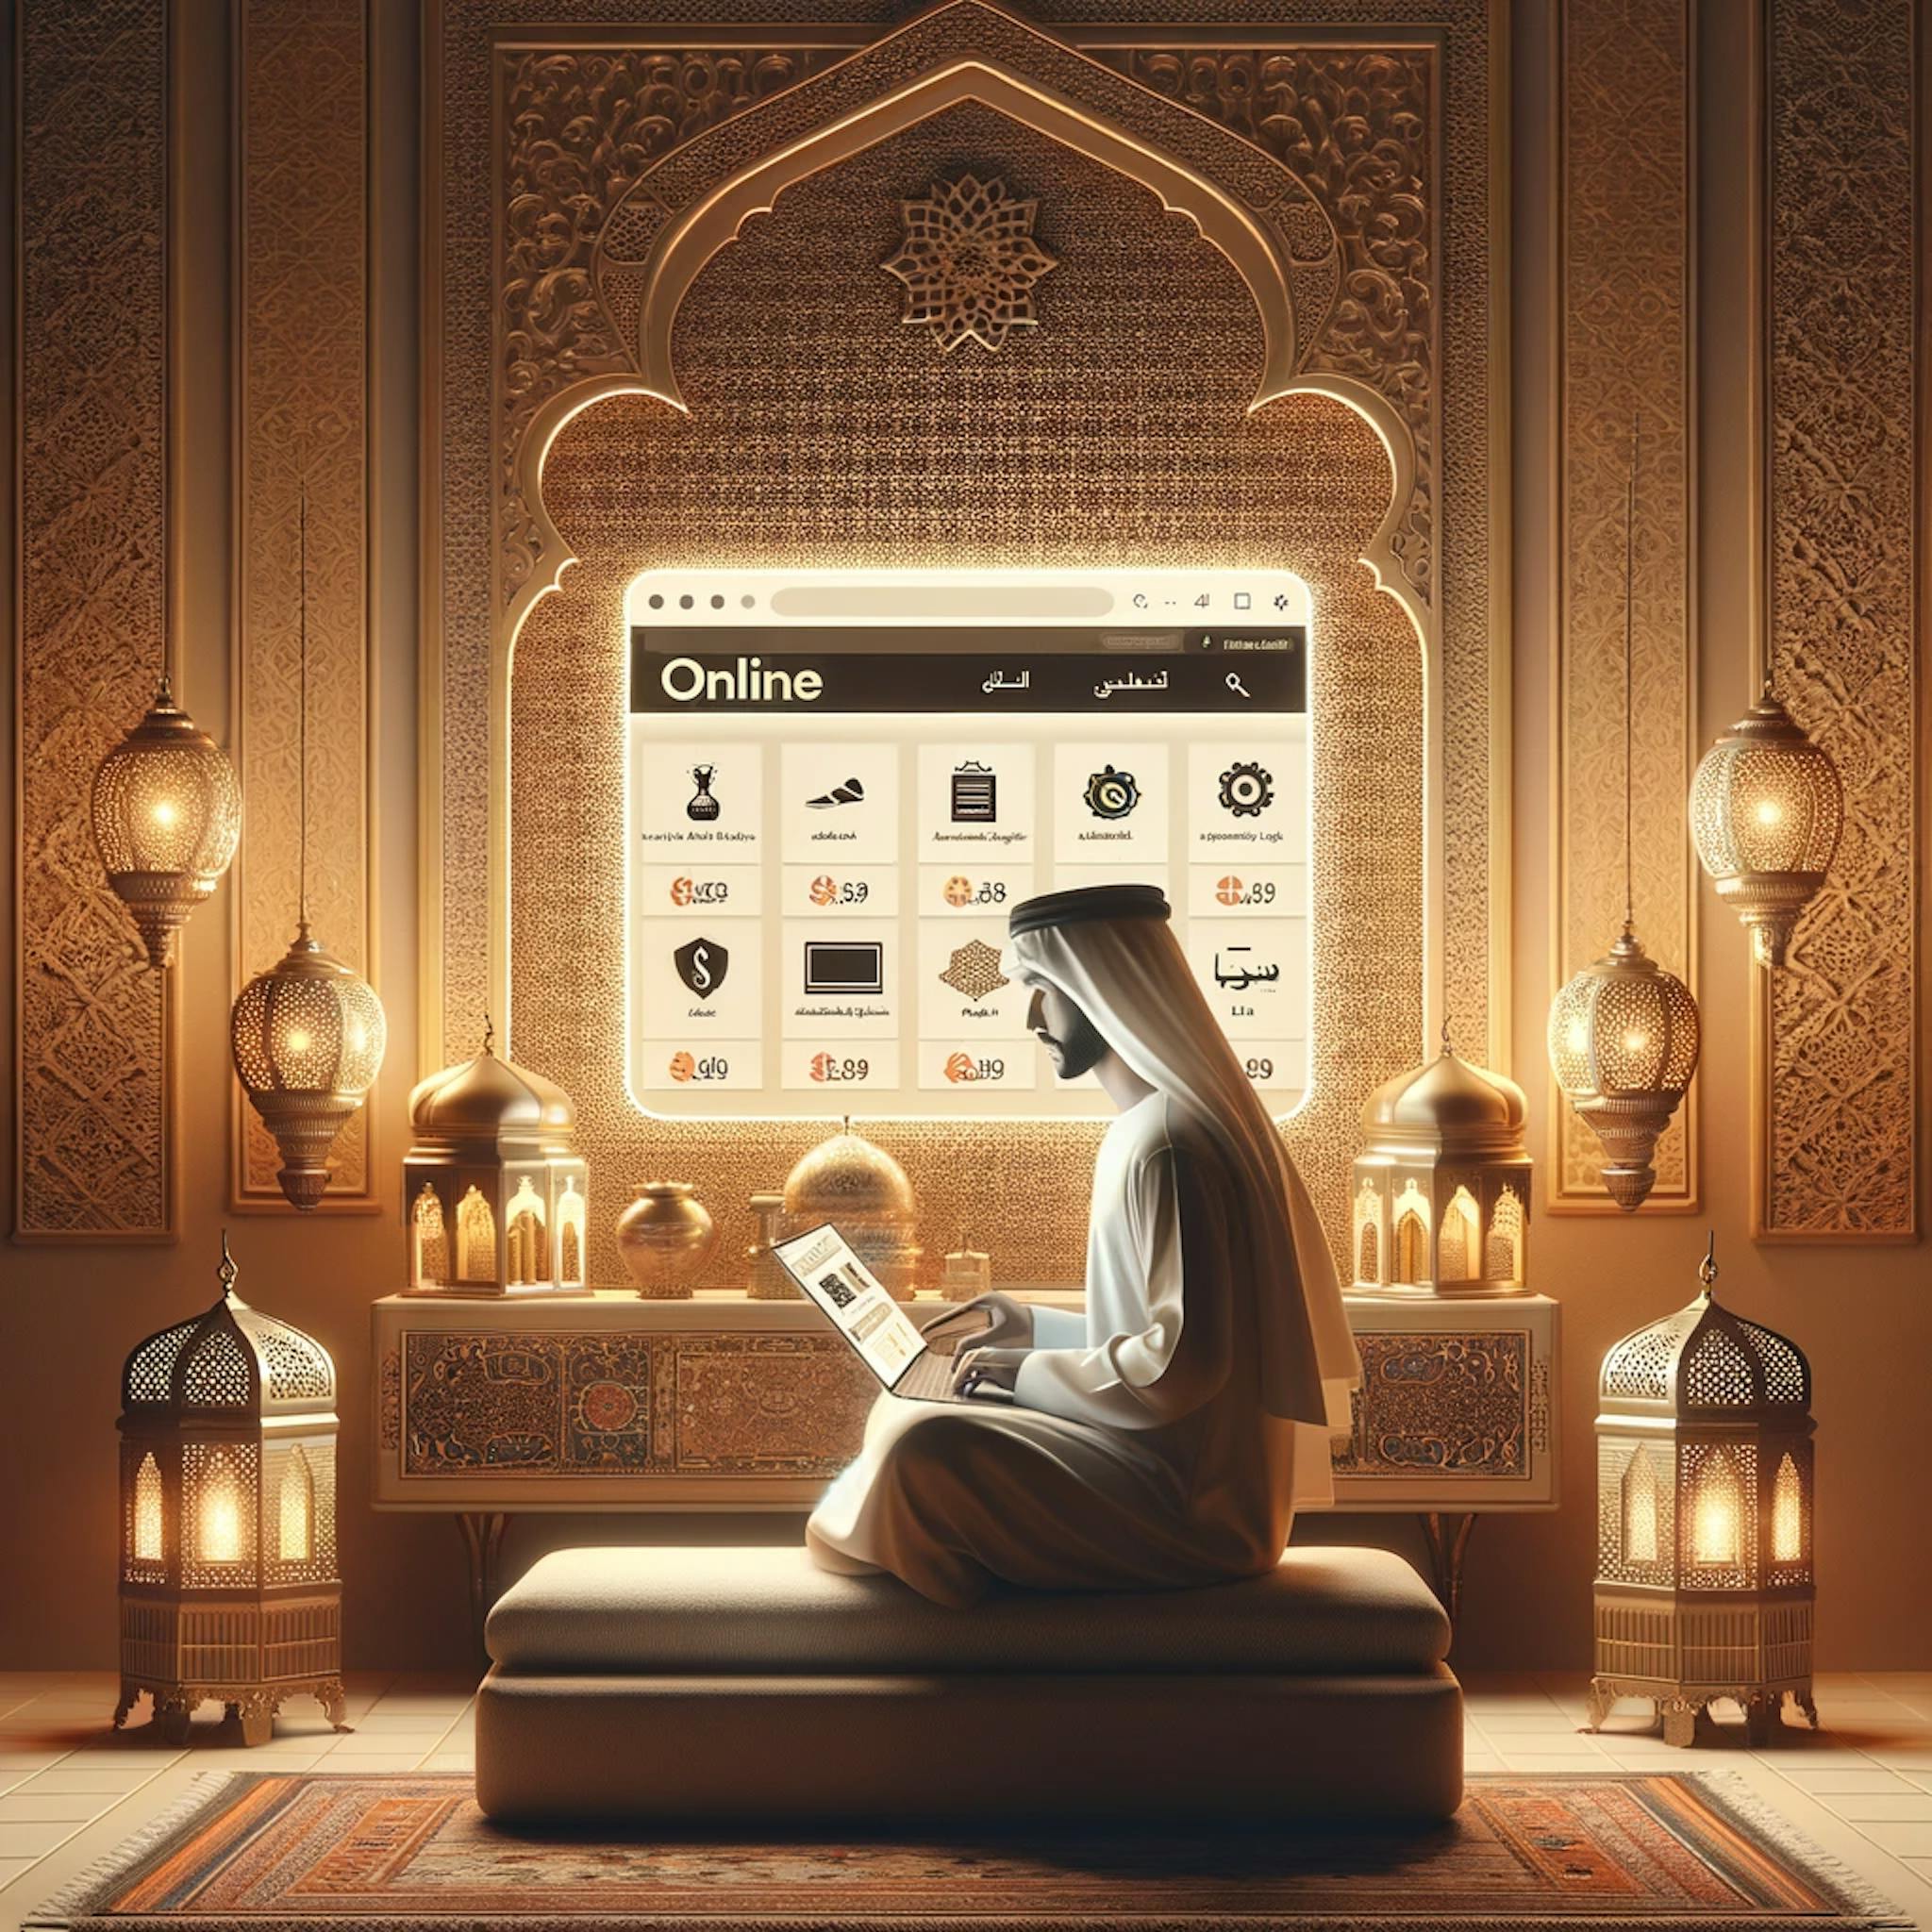  person finding online deals, sales, and discounts, set against a minimalist and realistic Arabic-themed background